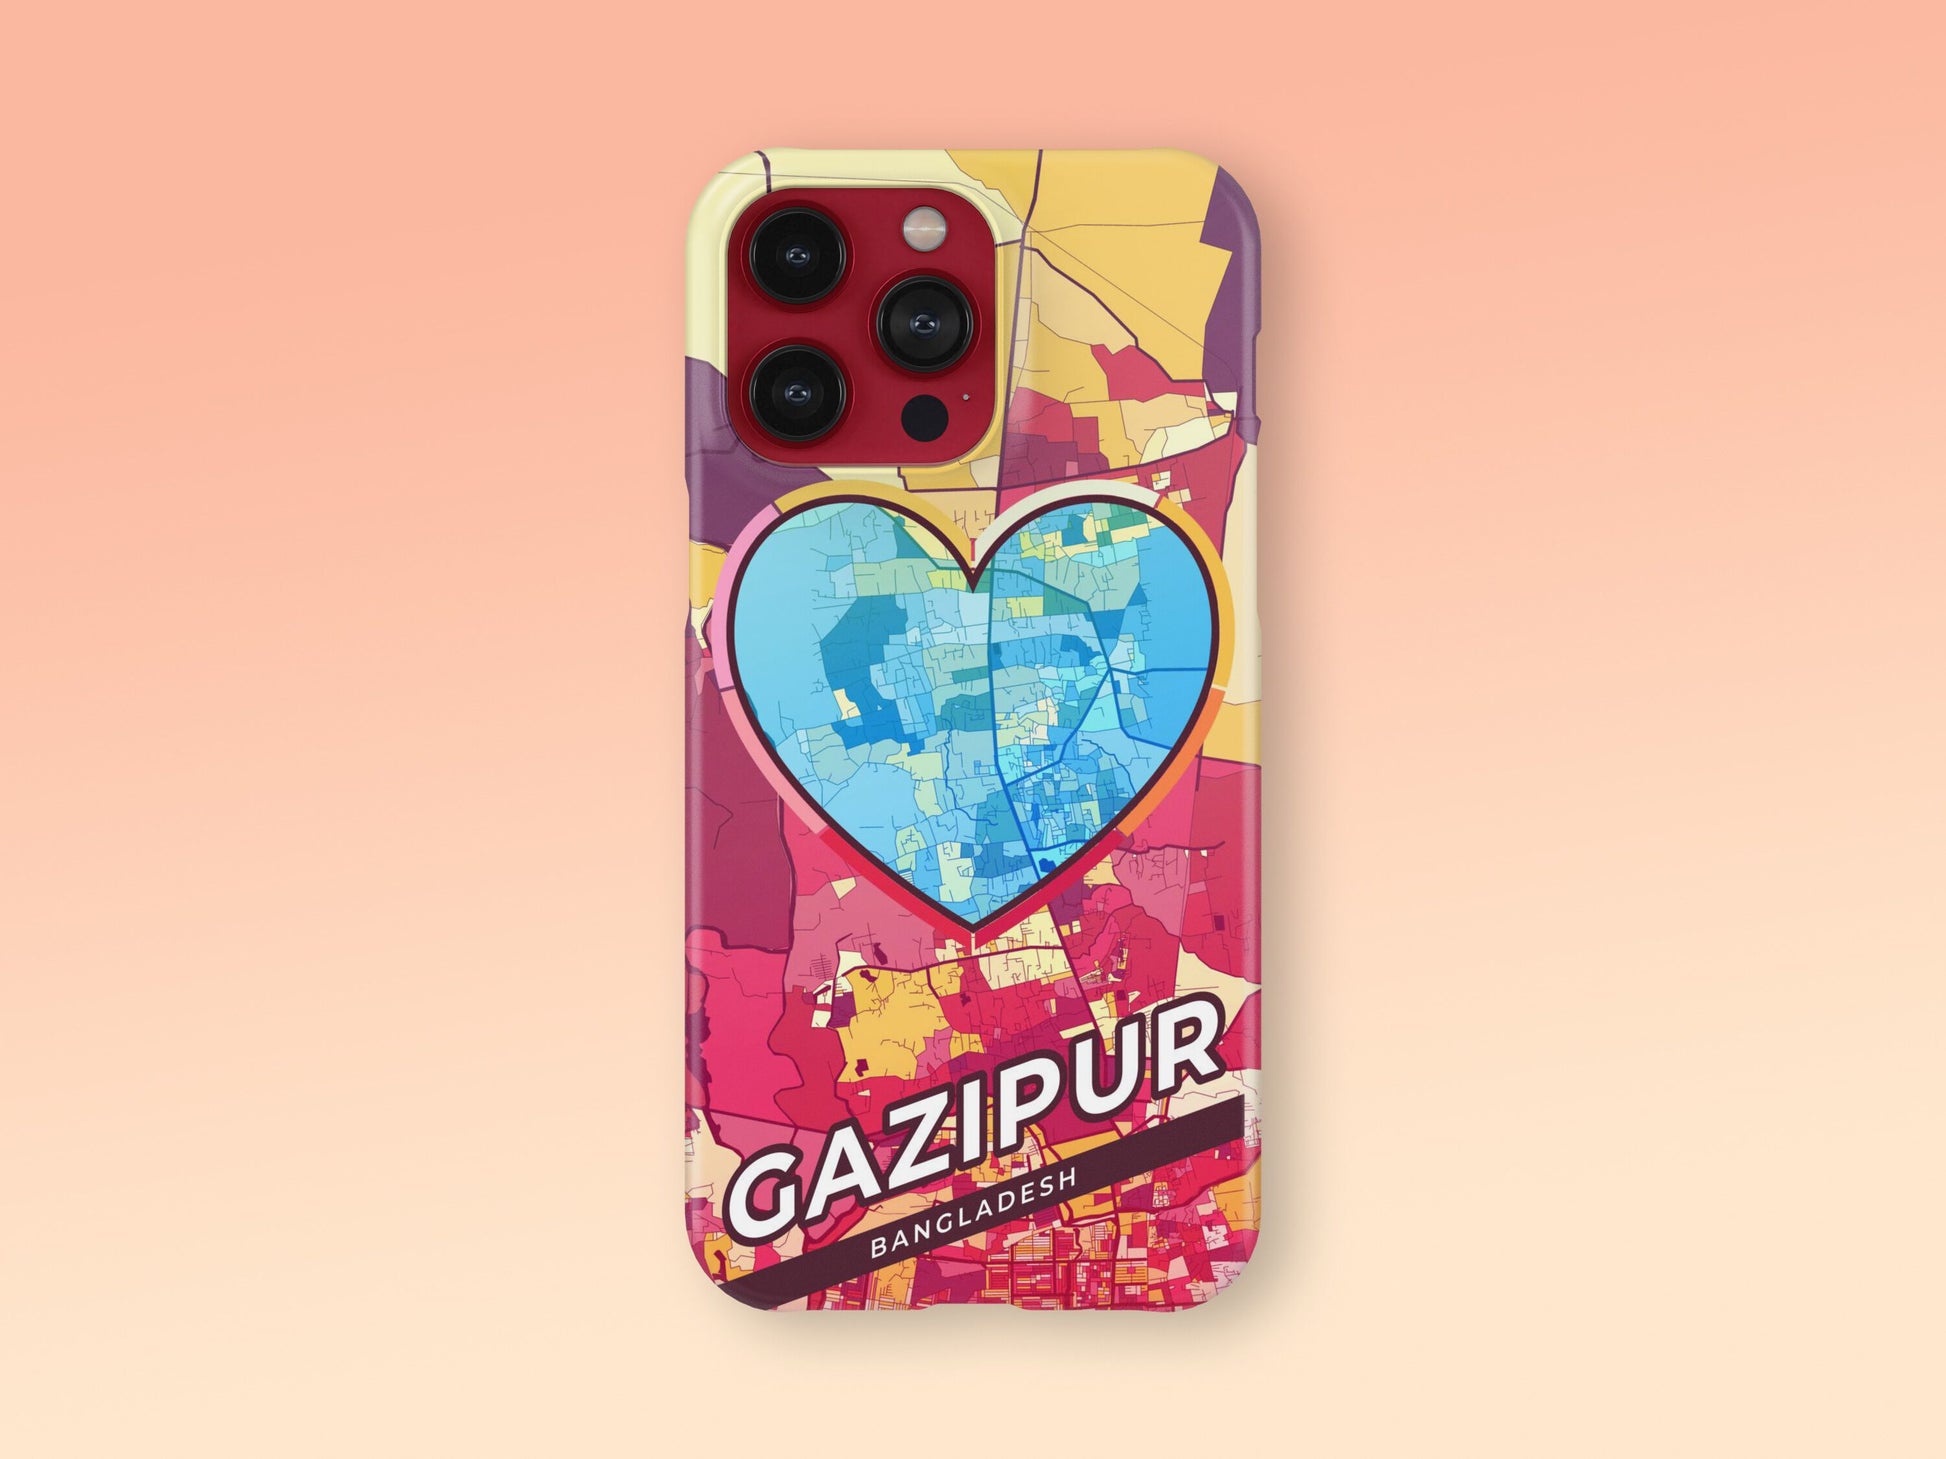 Gazipur Bangladesh slim phone case with colorful icon. Birthday, wedding or housewarming gift. Couple match cases. 2